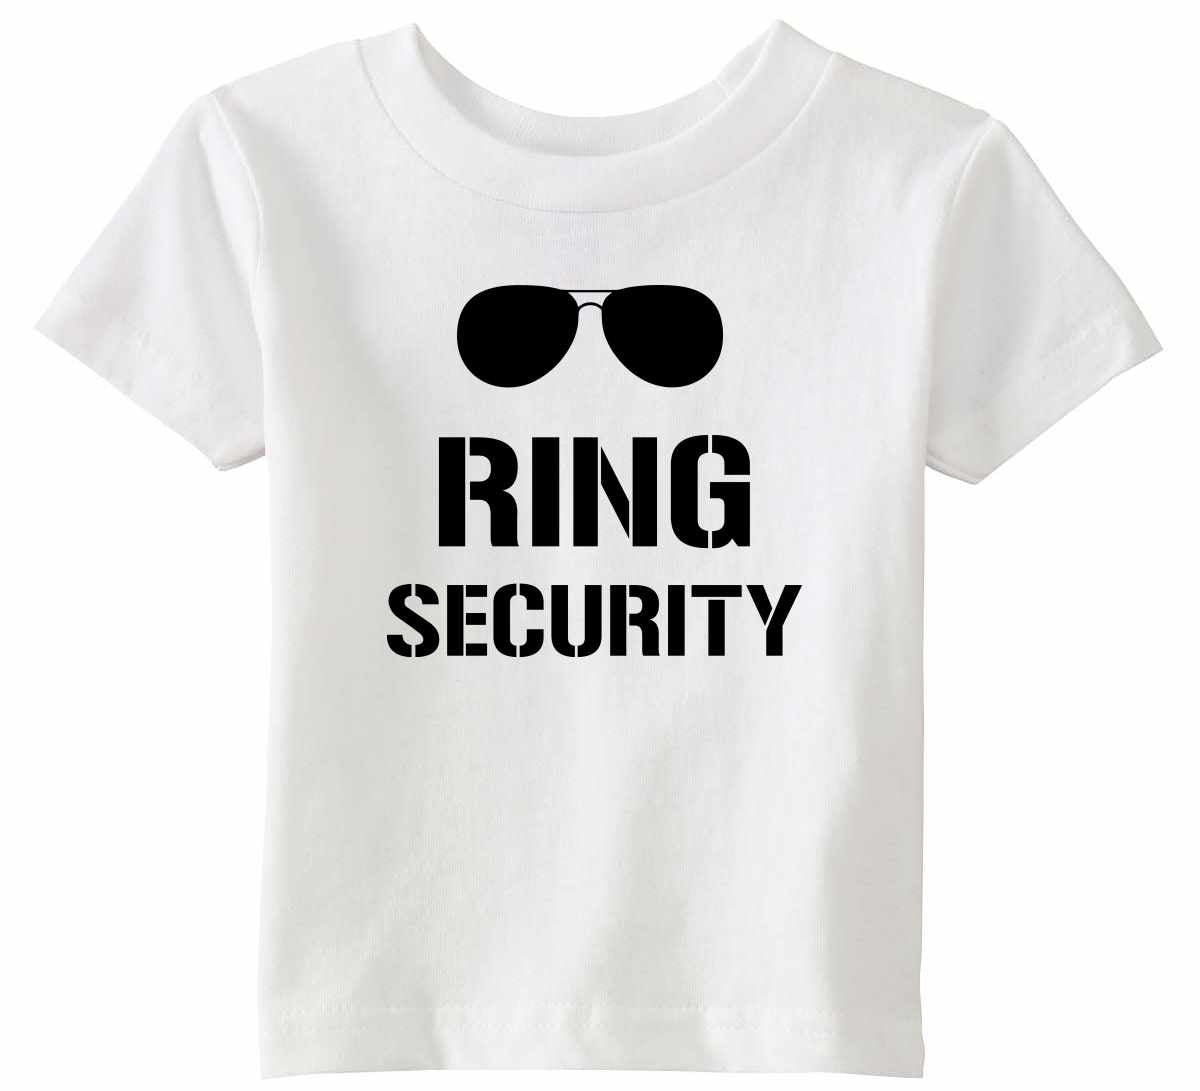 Ring Security Infant/Toddler  (#1011-7)